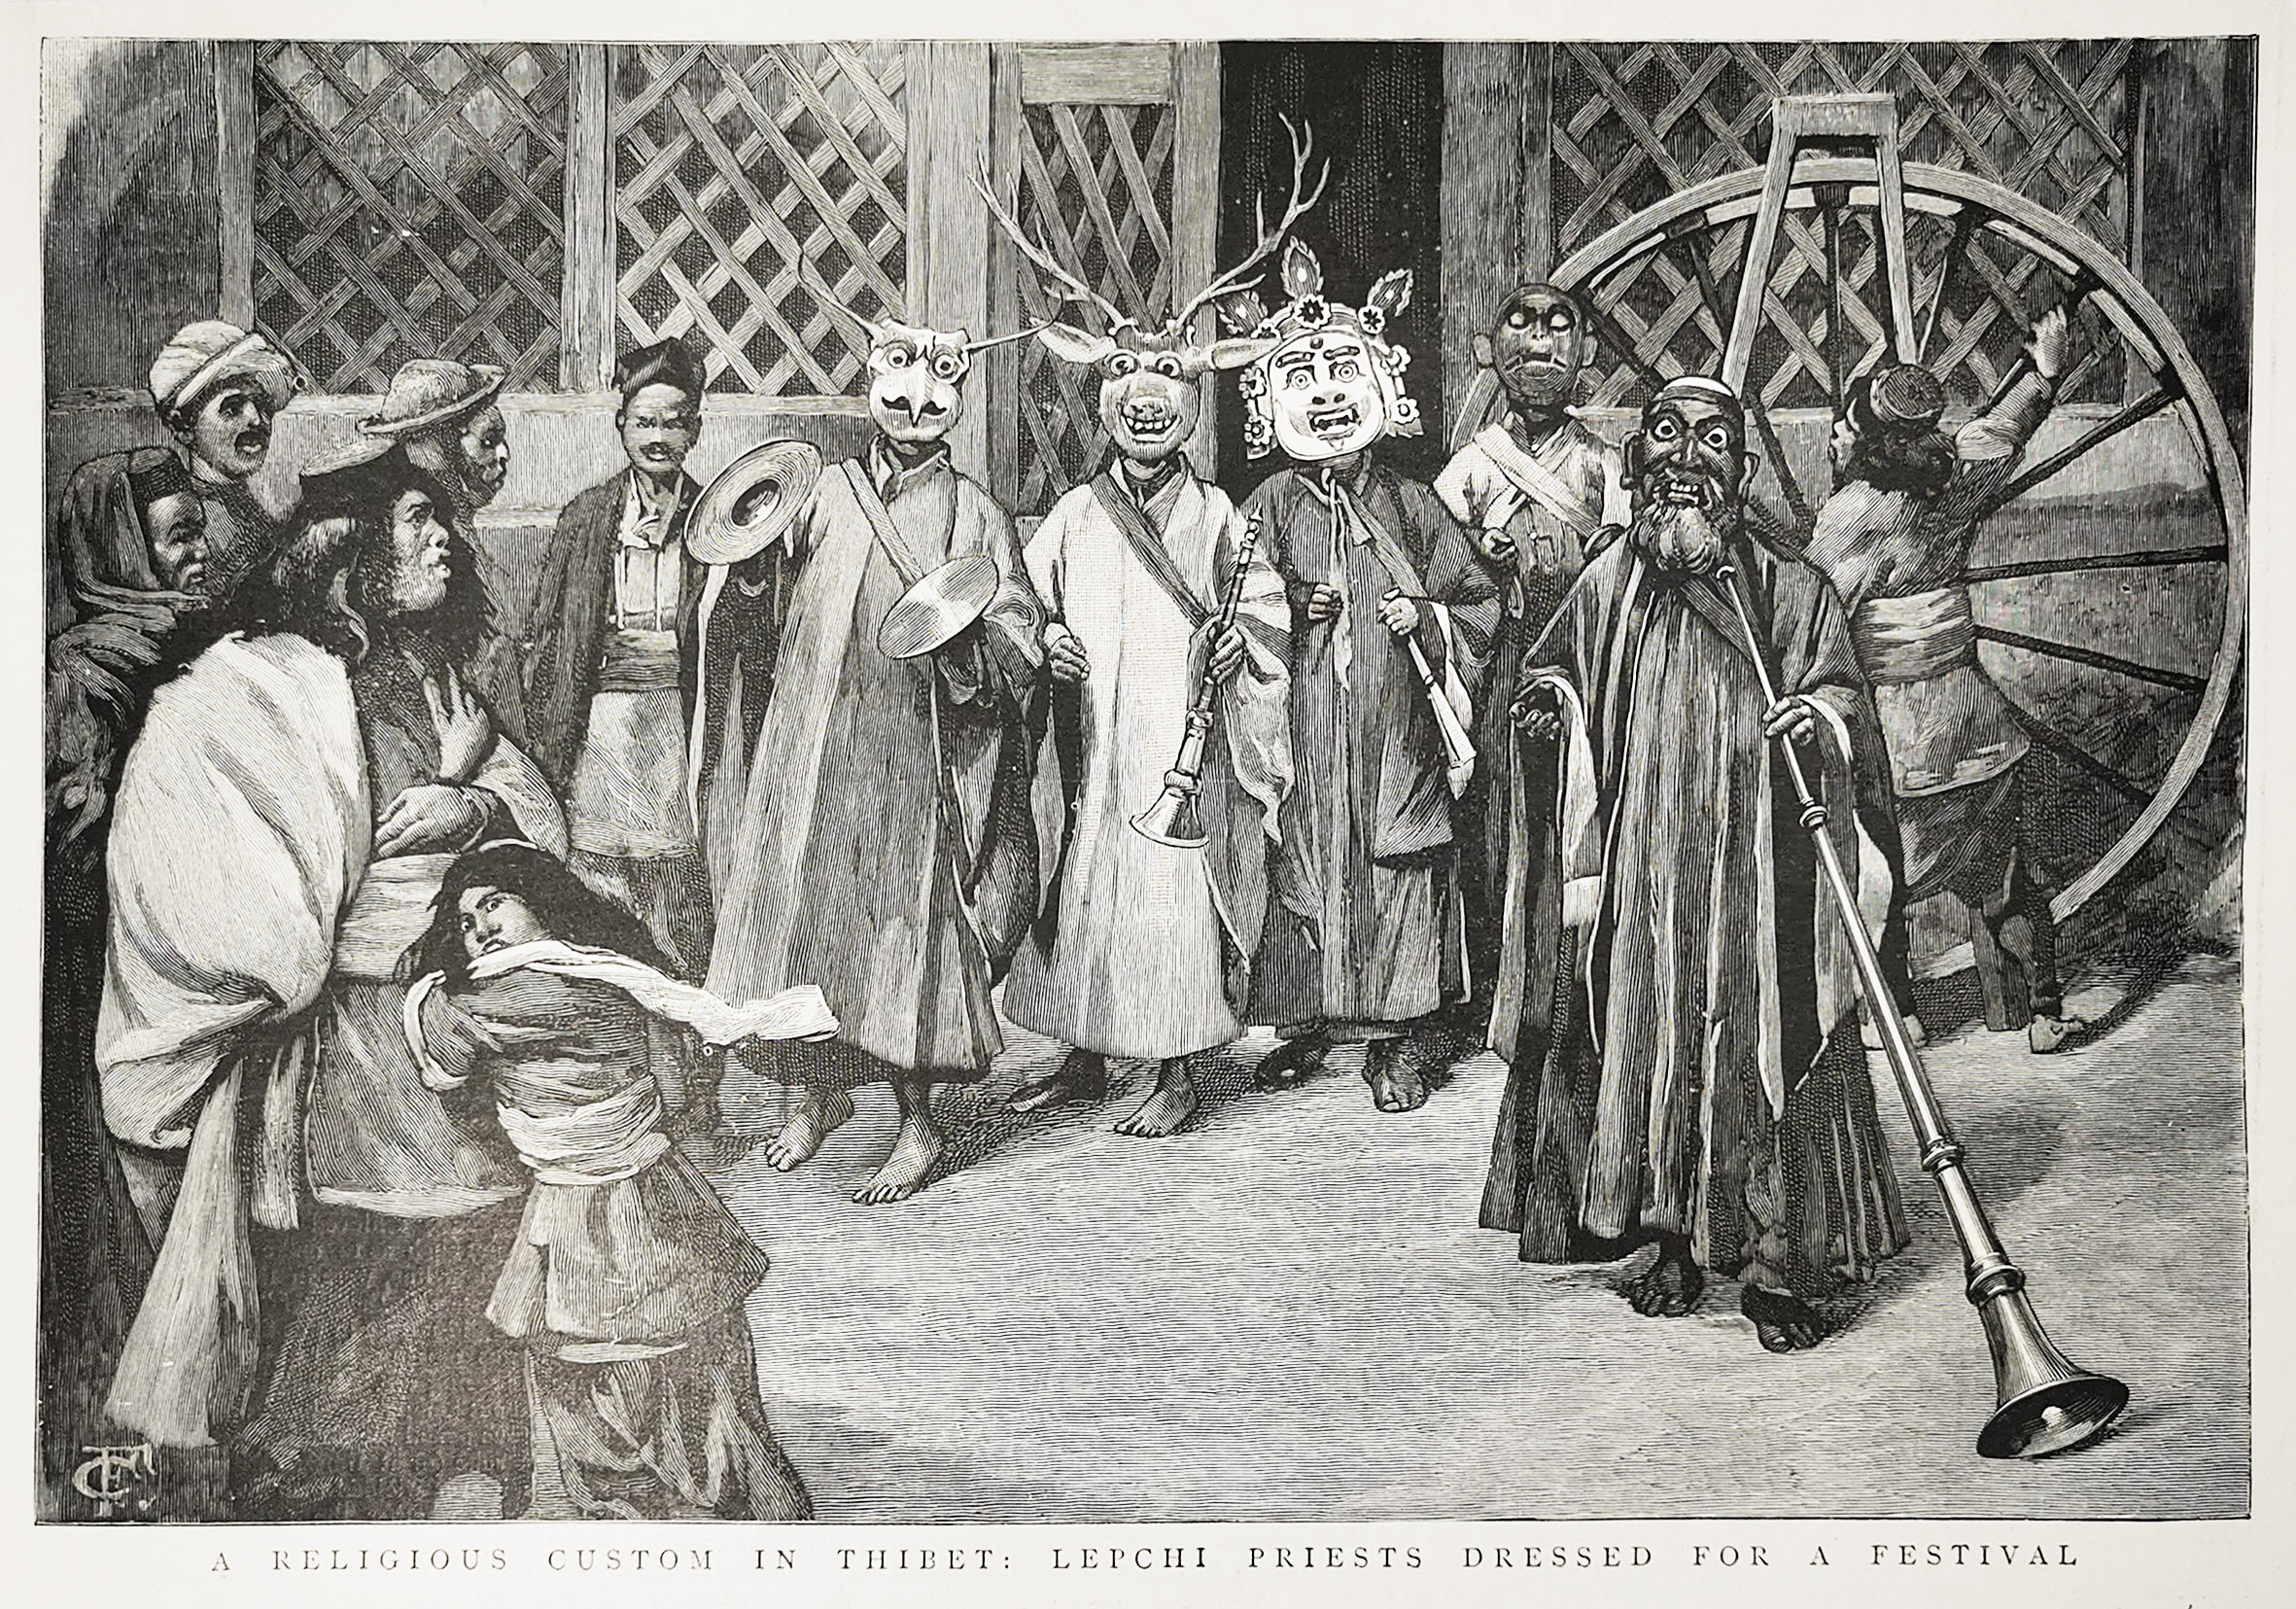 A Religious Custom in Thibet, Lepchi Priests dressed for a Festival. - Antique Print from 1895